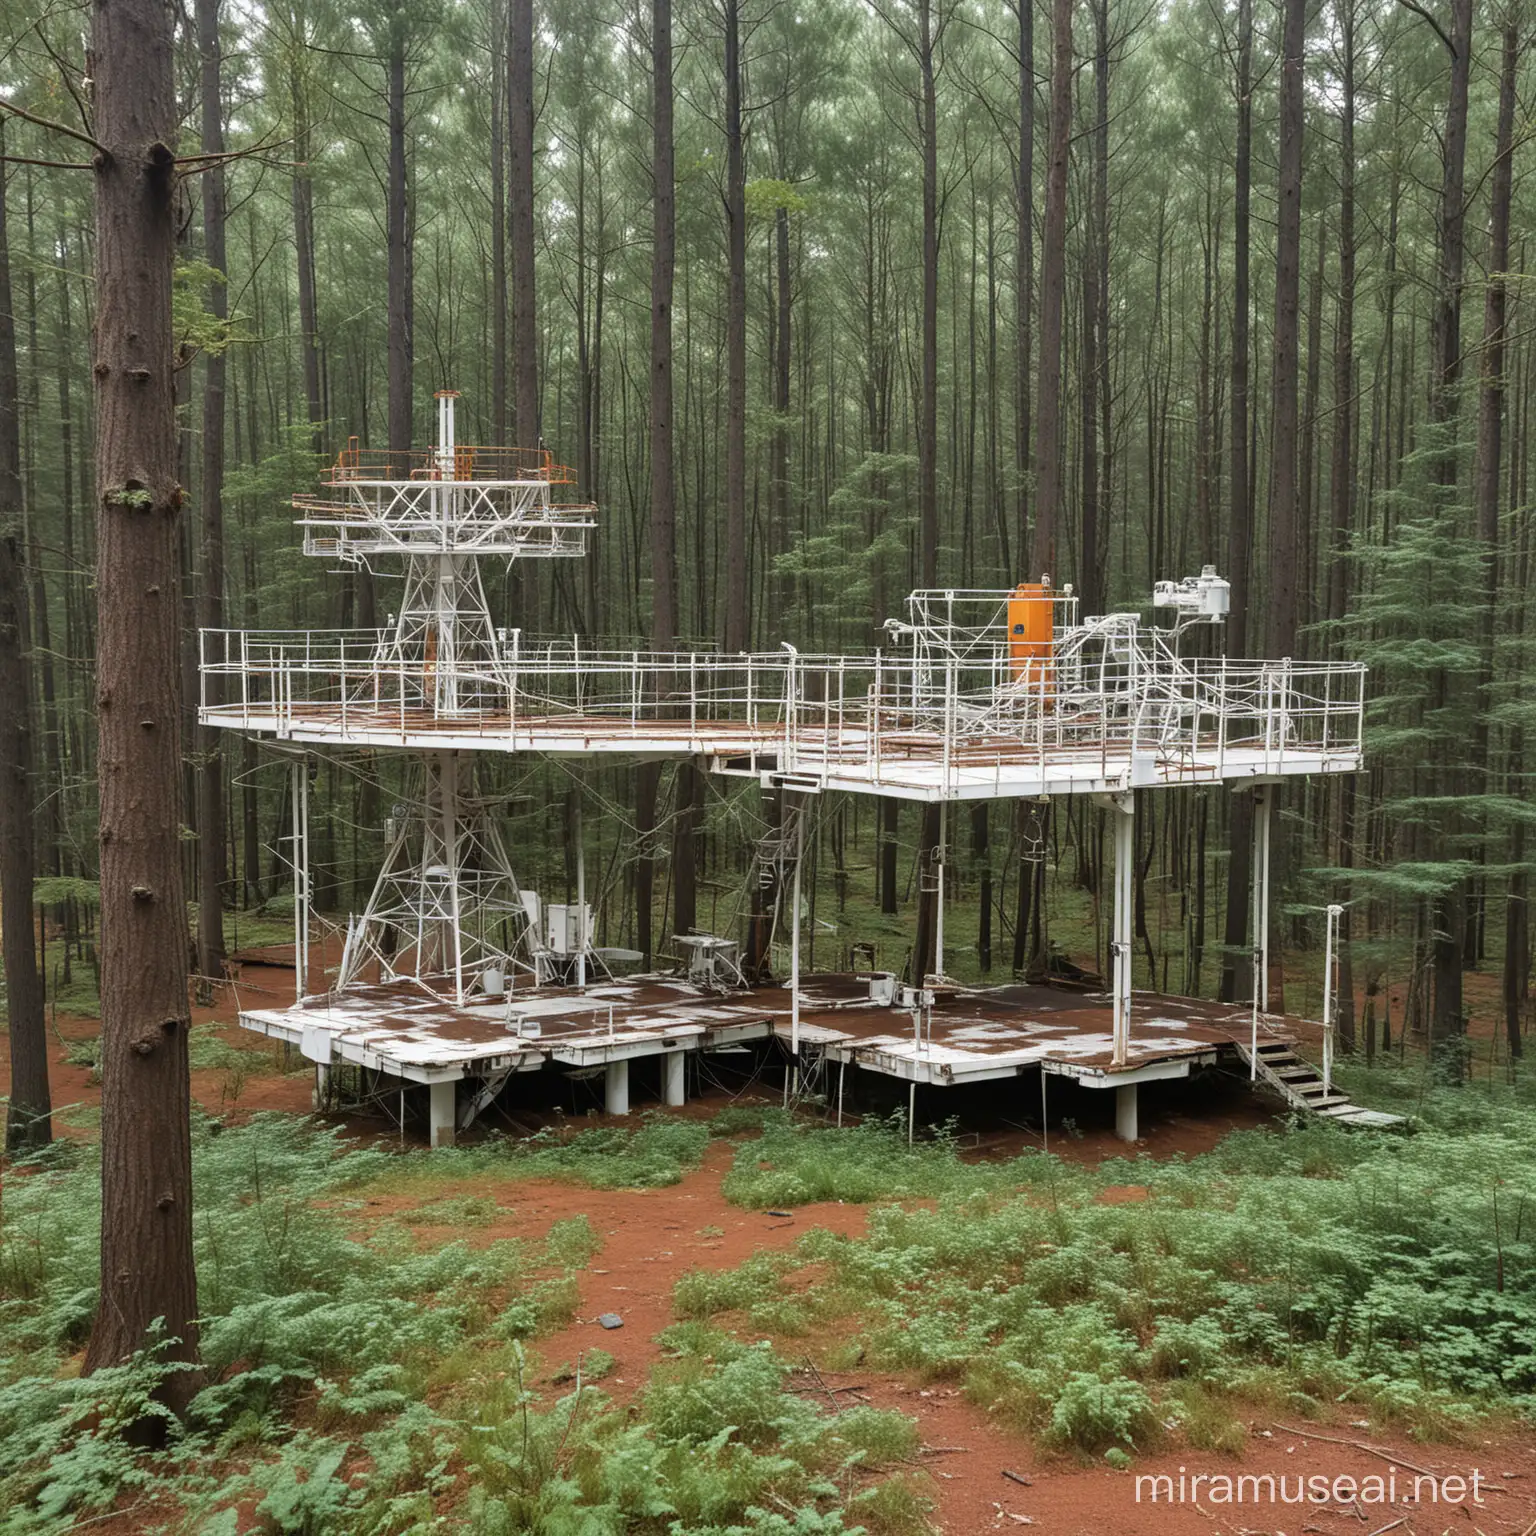 Rusty Antennas and Space Observation Equipment on Forest Platform